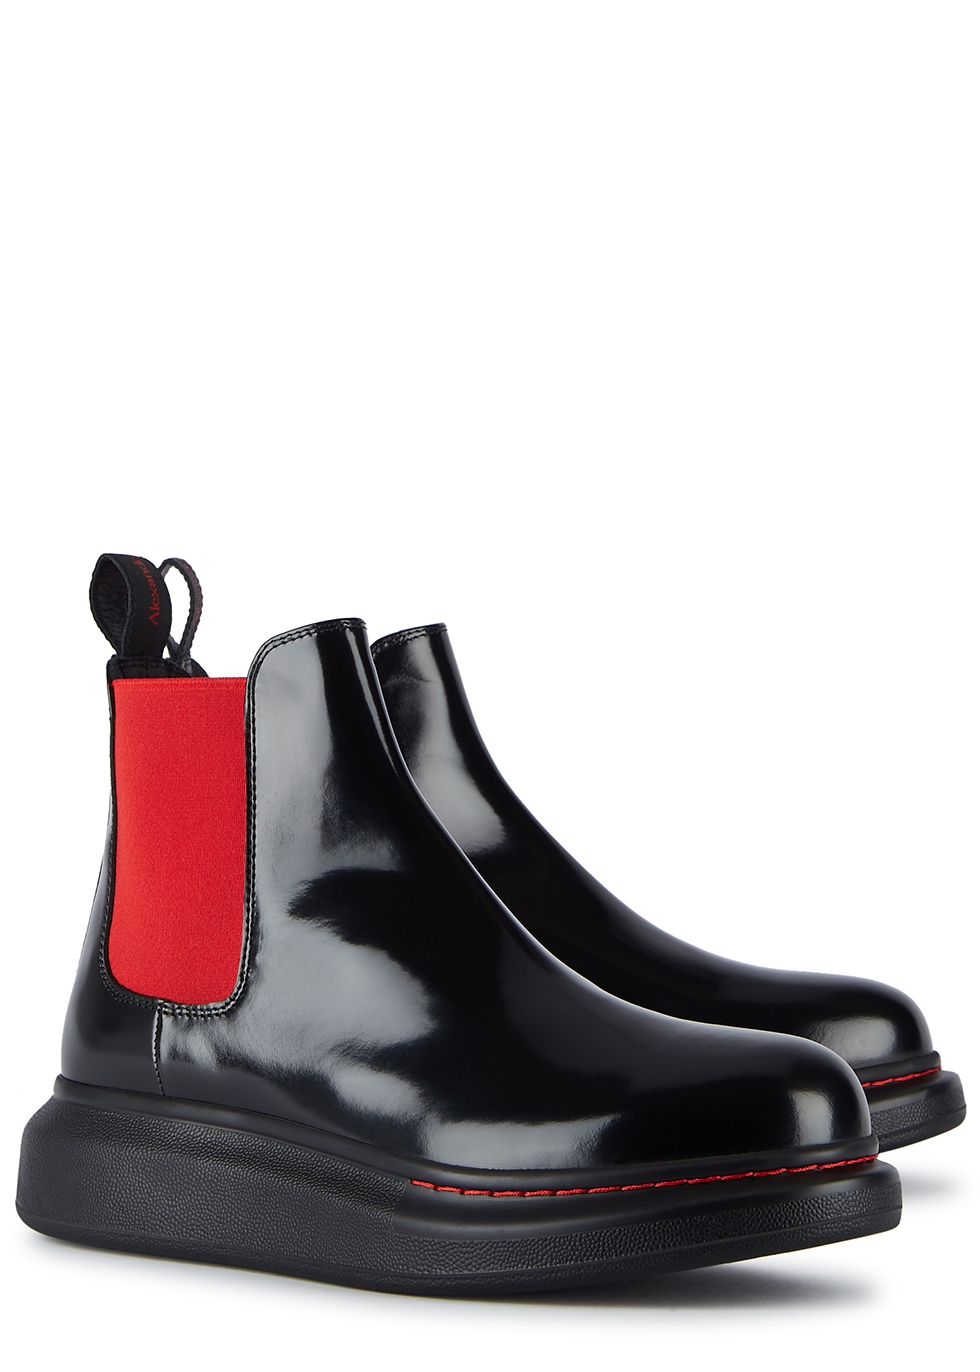 alexander mcqueen black and red